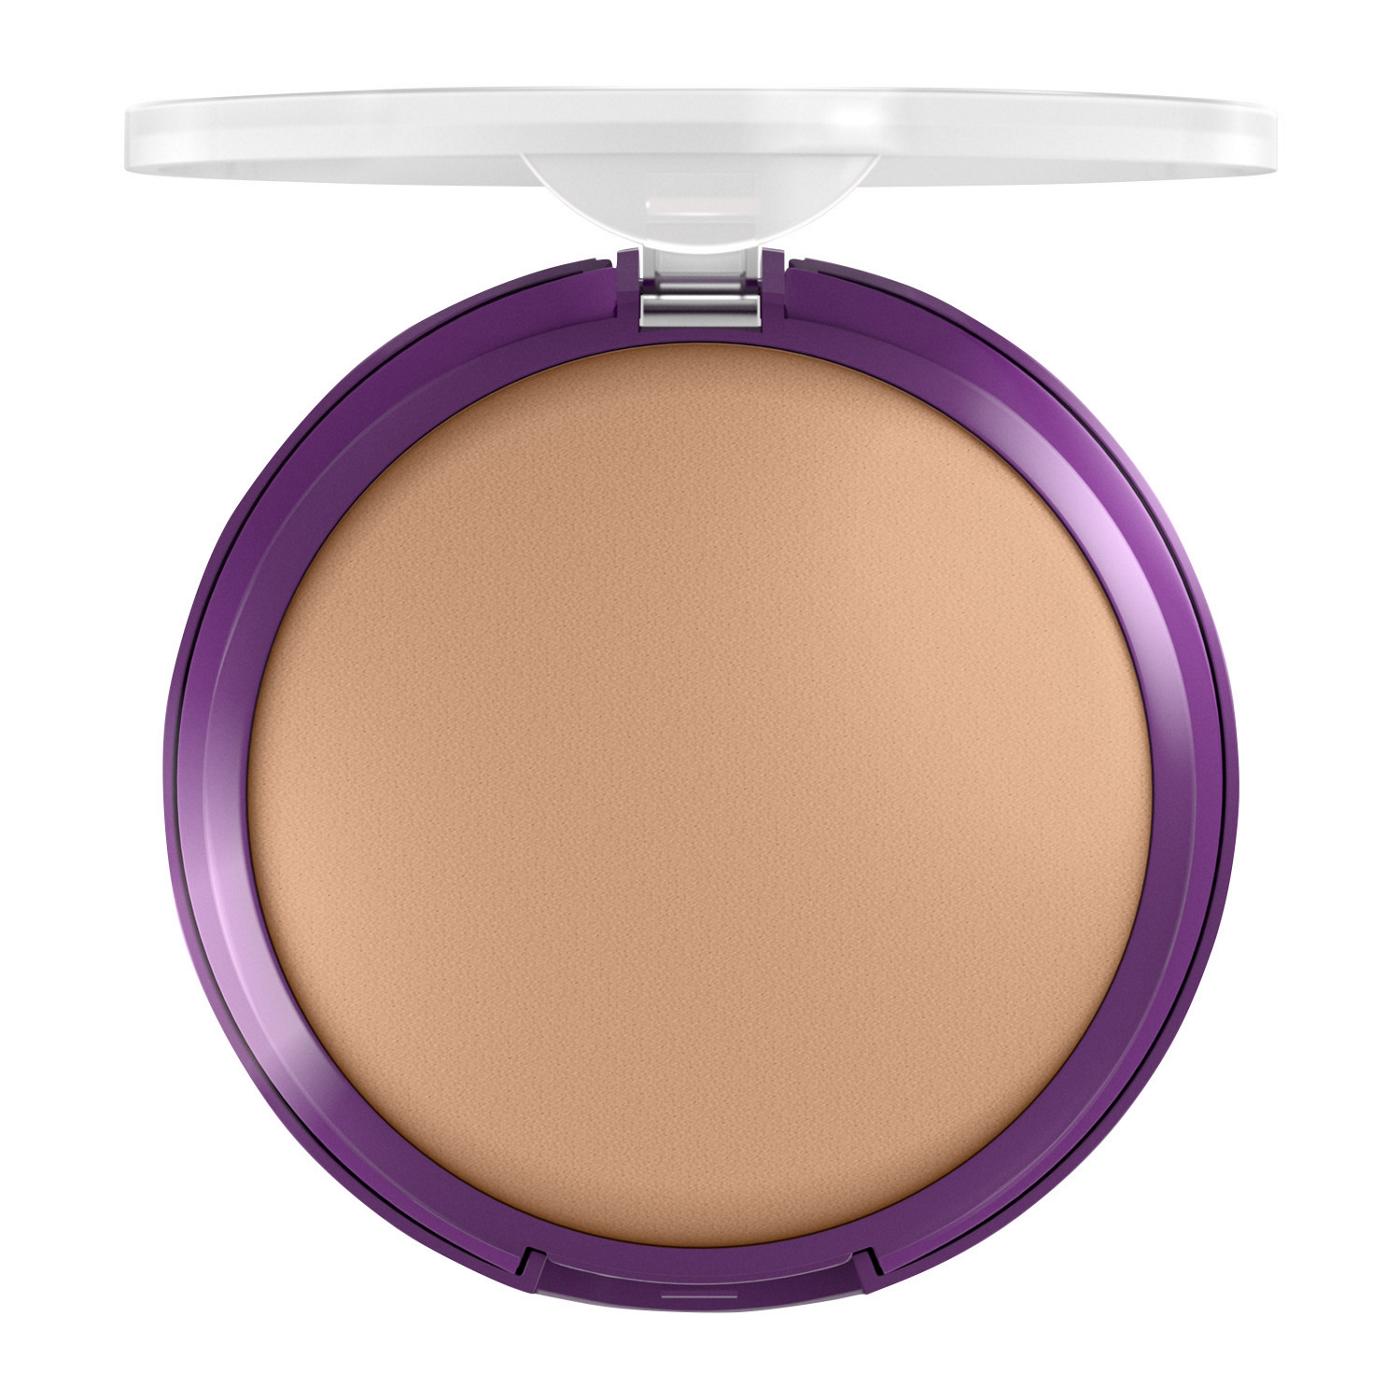 Covergirl Simply Ageless Pressed Powder 225 Buff Beige; image 5 of 13